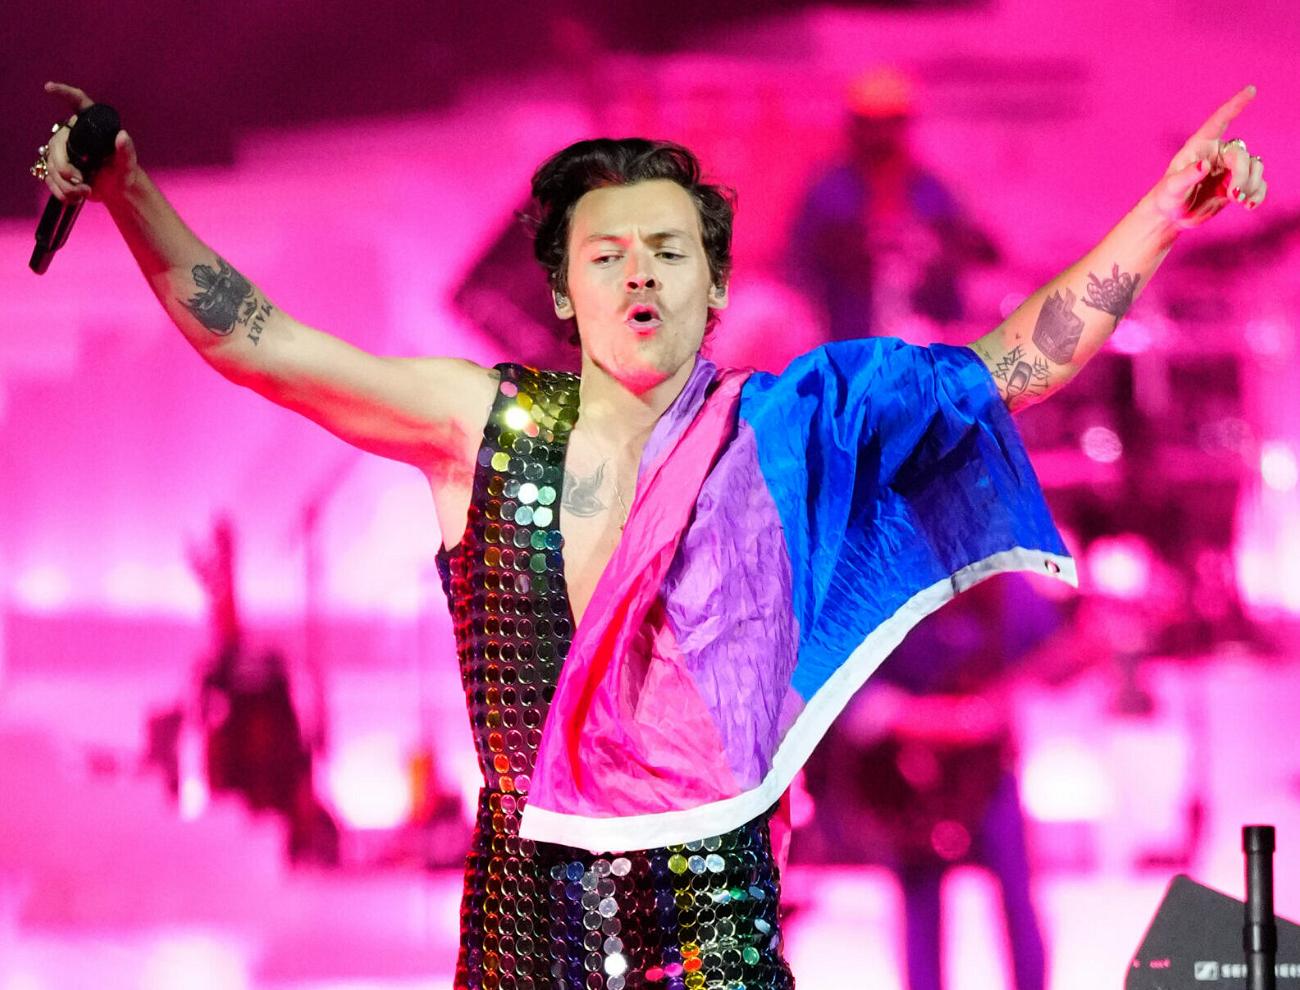 Harry Styles performs at 2022 Coachella Festival in Indio CA